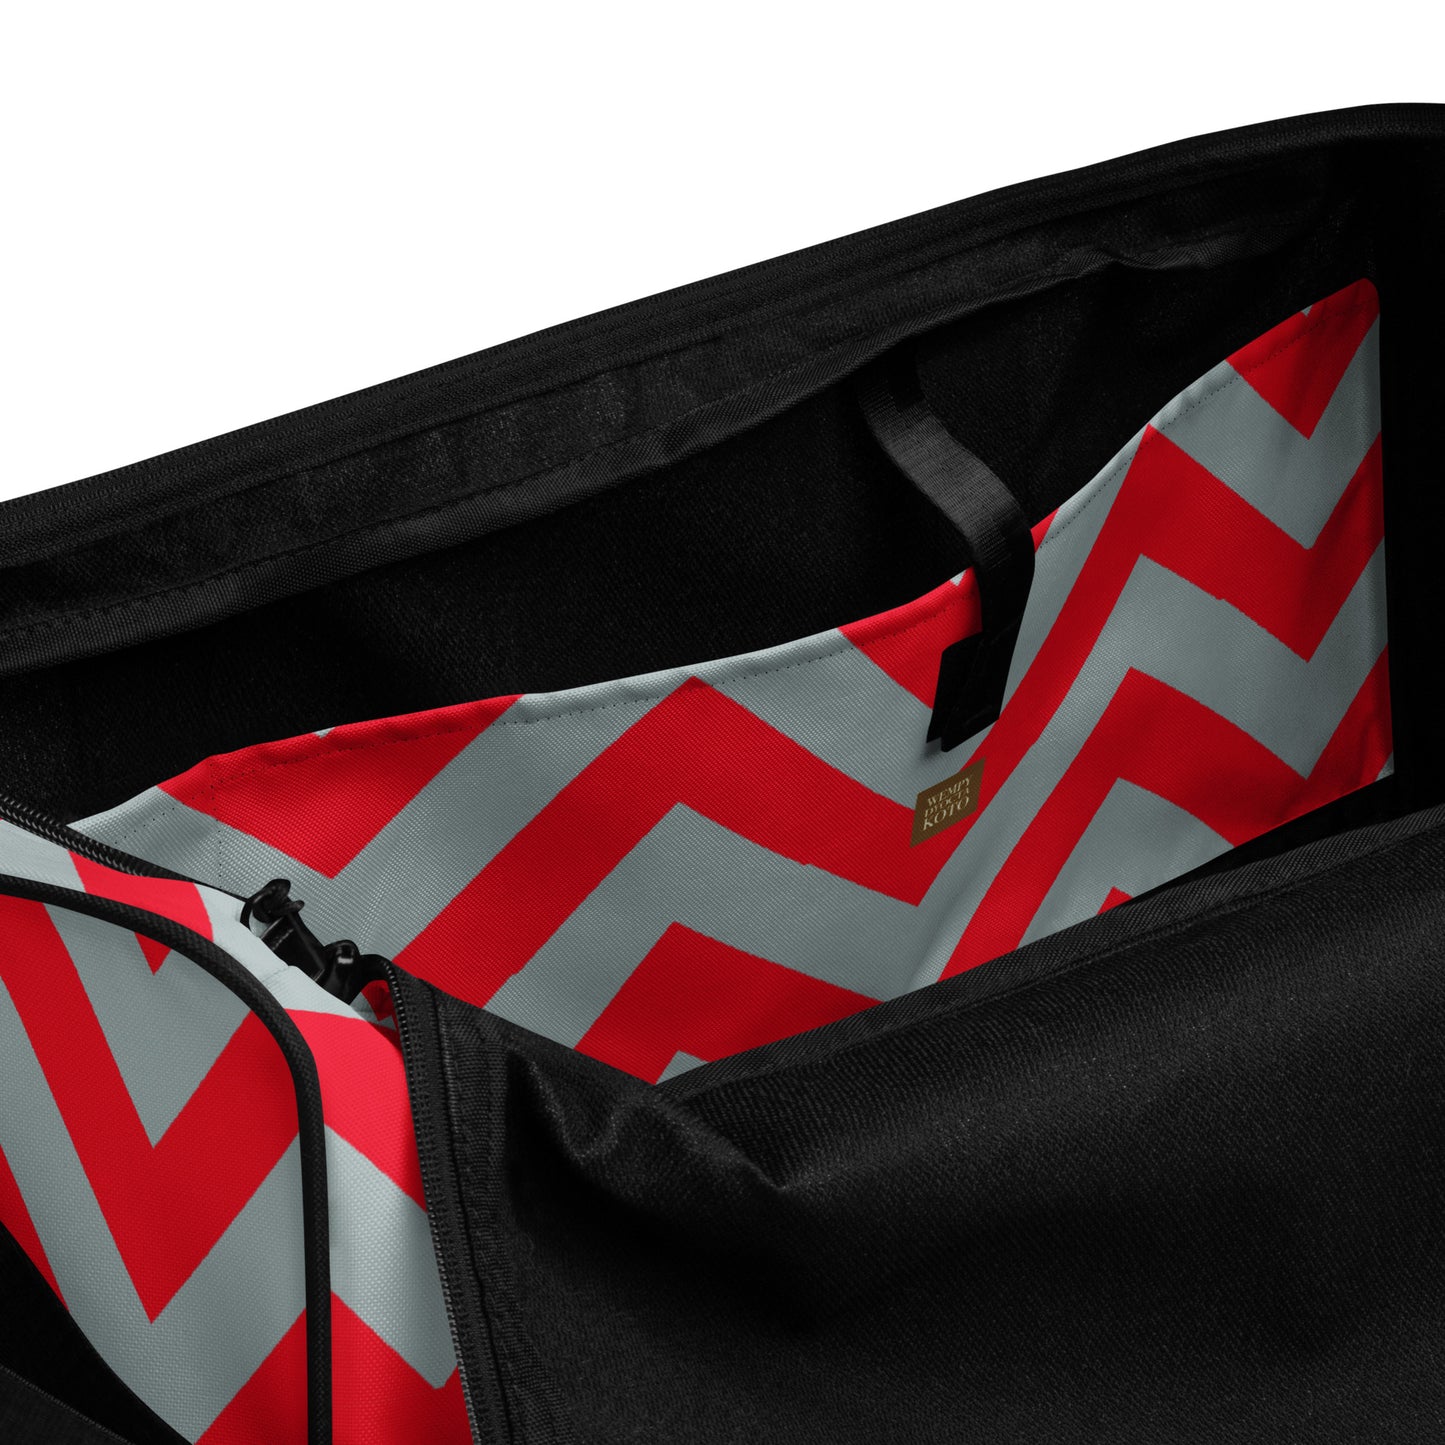 Zigzag - Inspired By Harry Styles - Sustainably Made Duffle bag